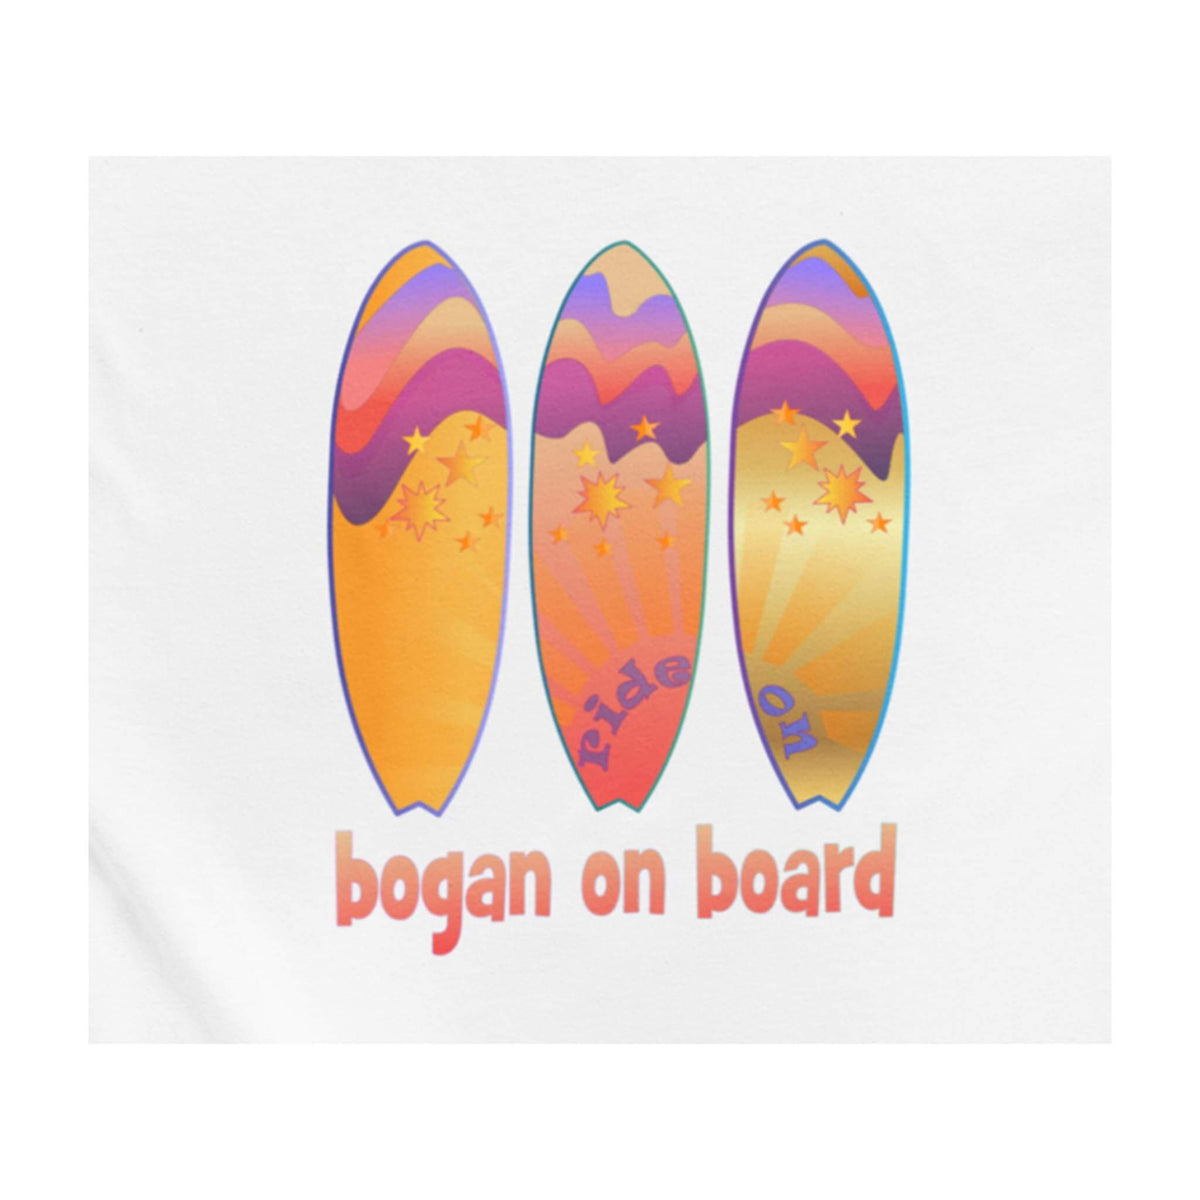 Bogan on Board graphic design featuring three brightly coloured surfboards on white